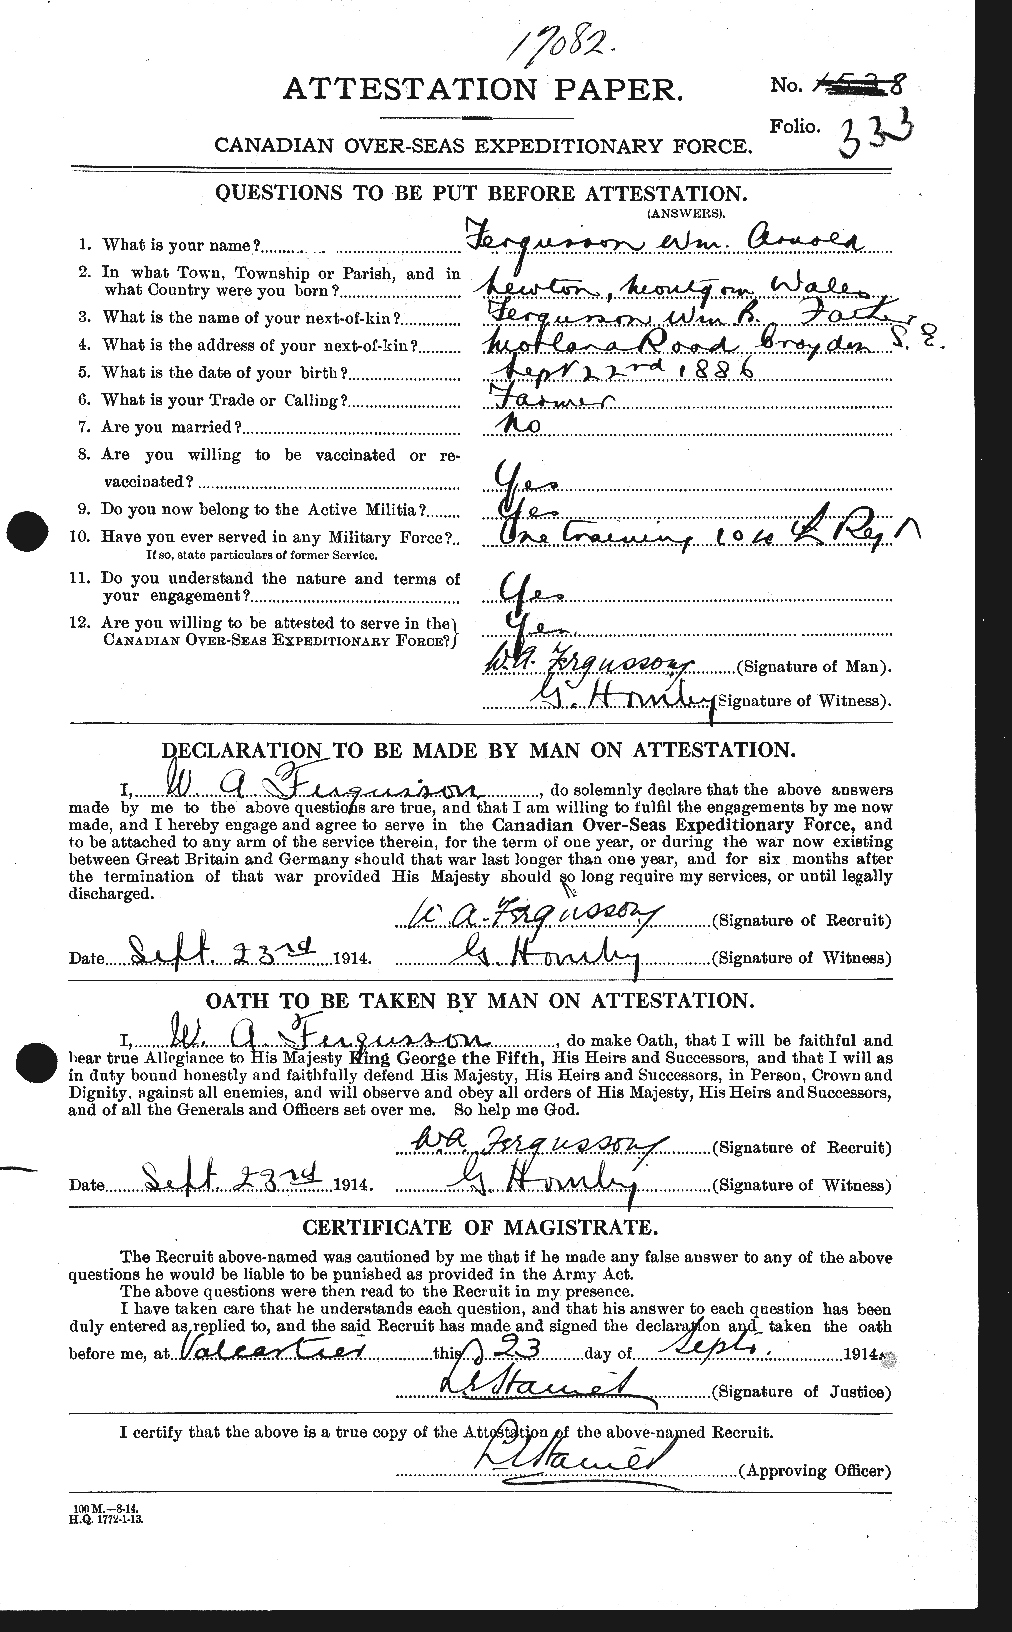 Personnel Records of the First World War - CEF 322172a